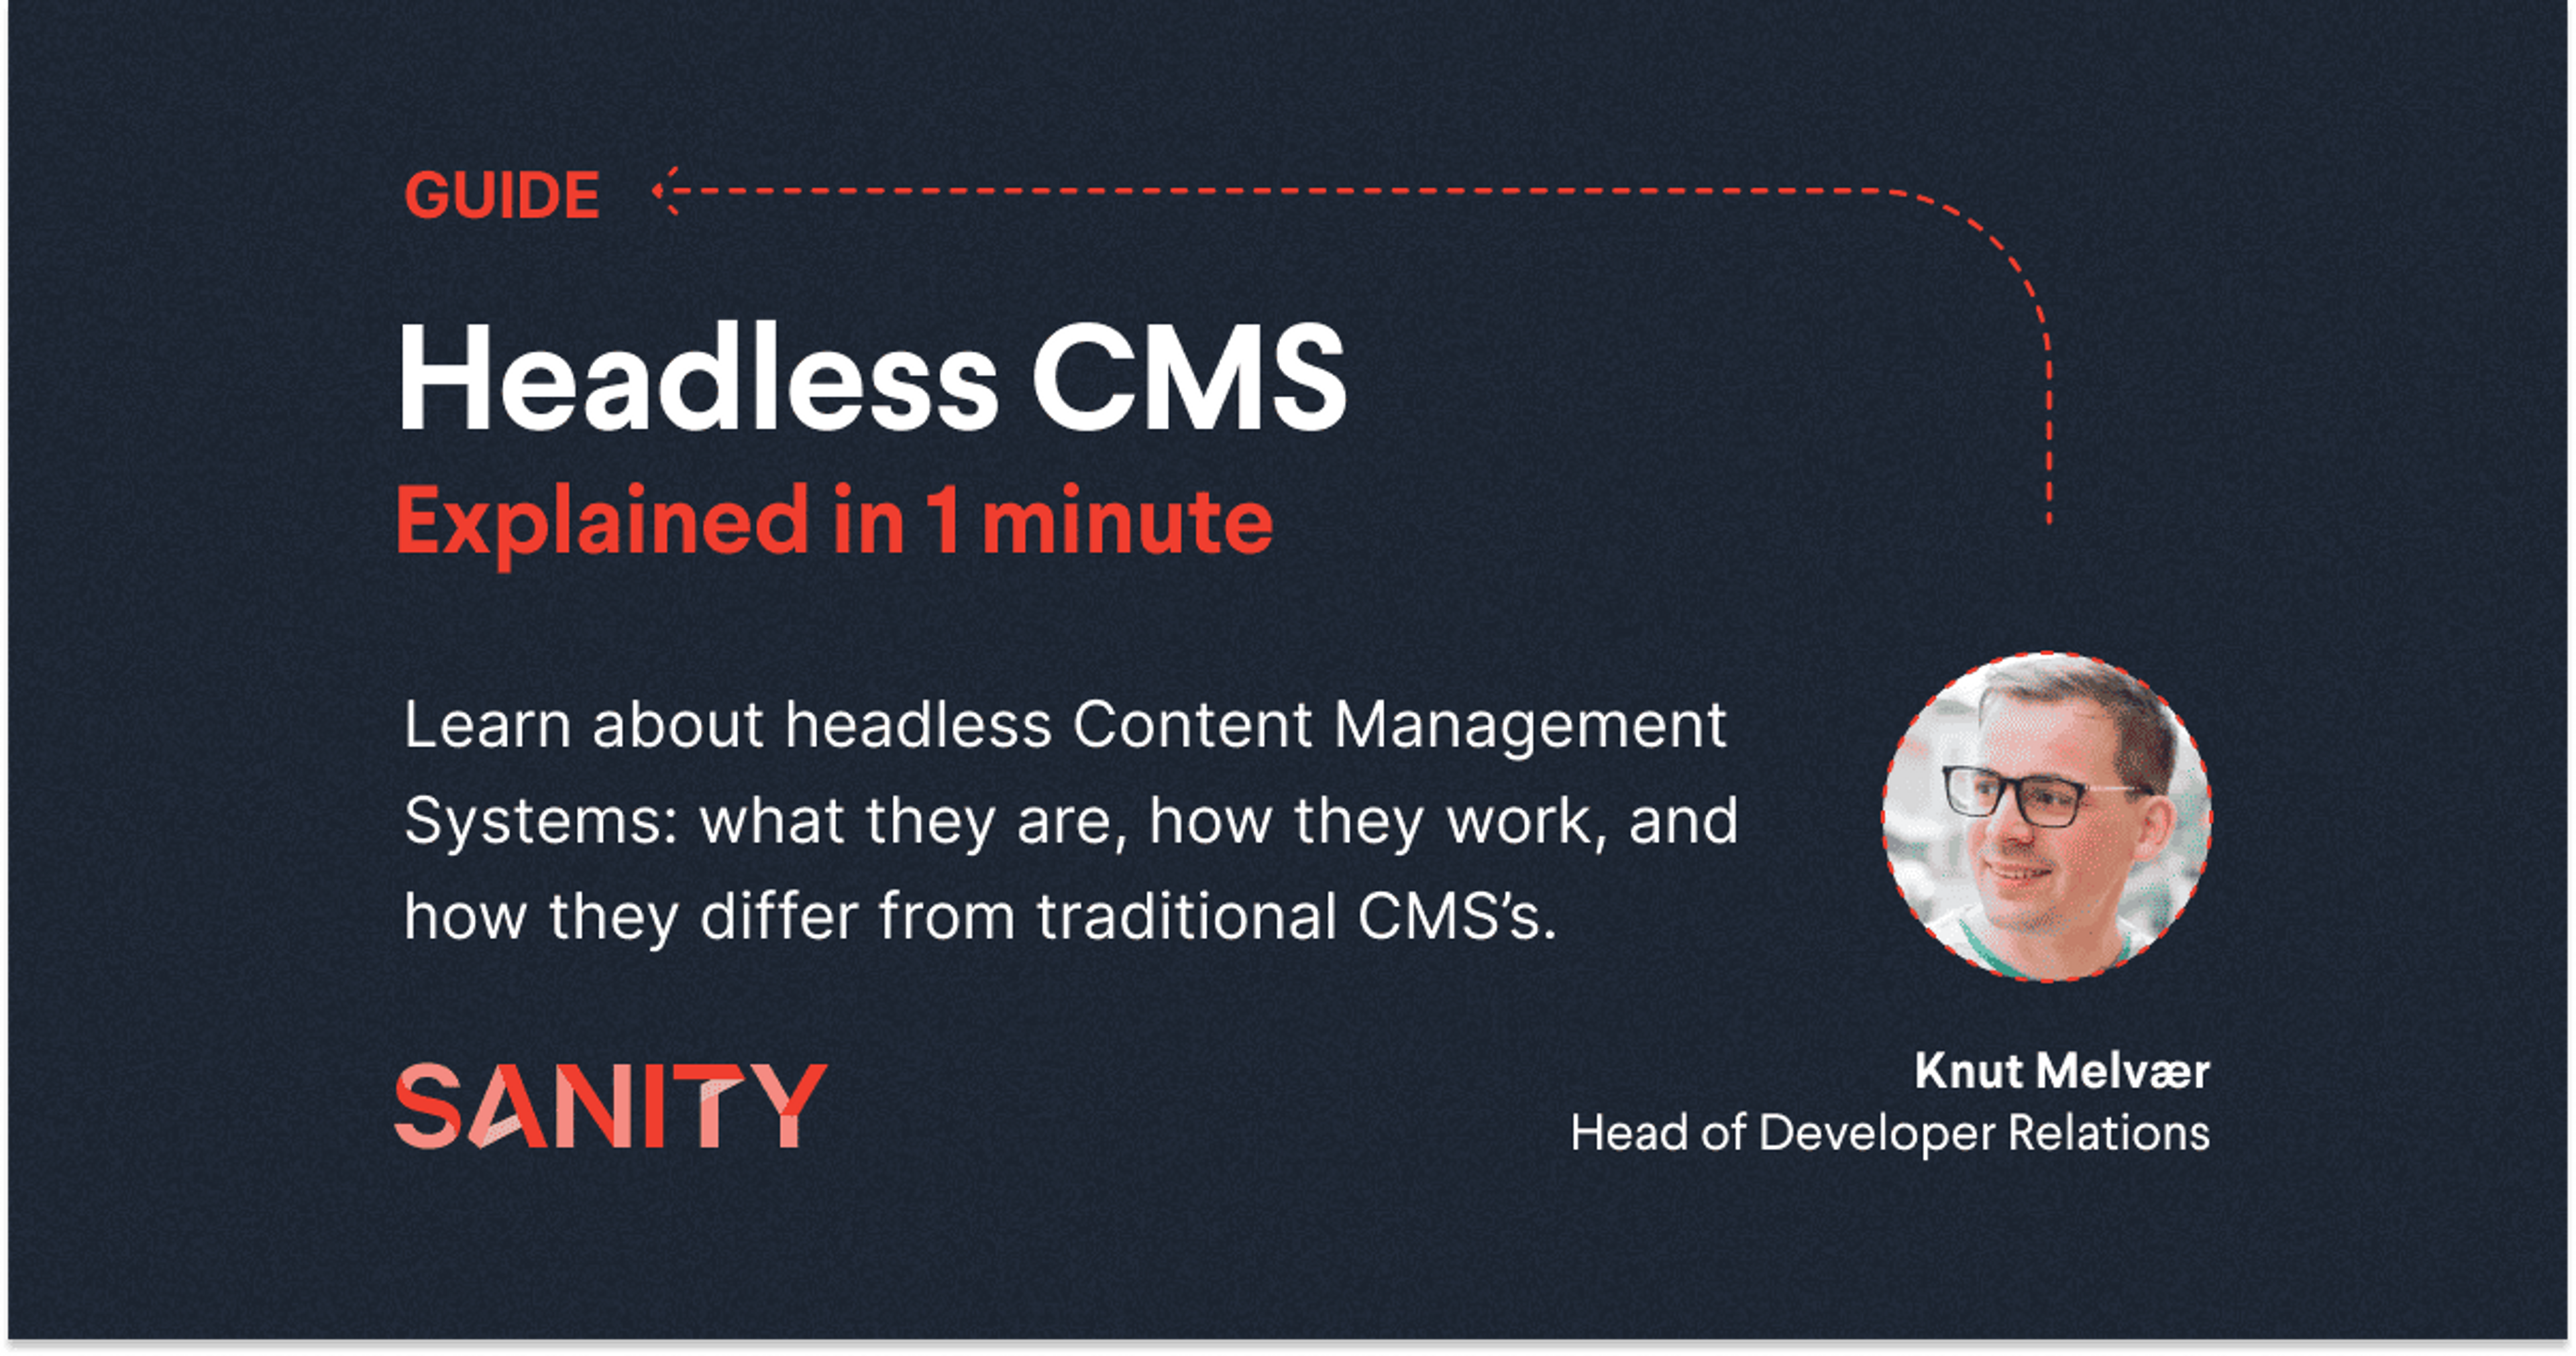 Headless CMS explained in 1 minute